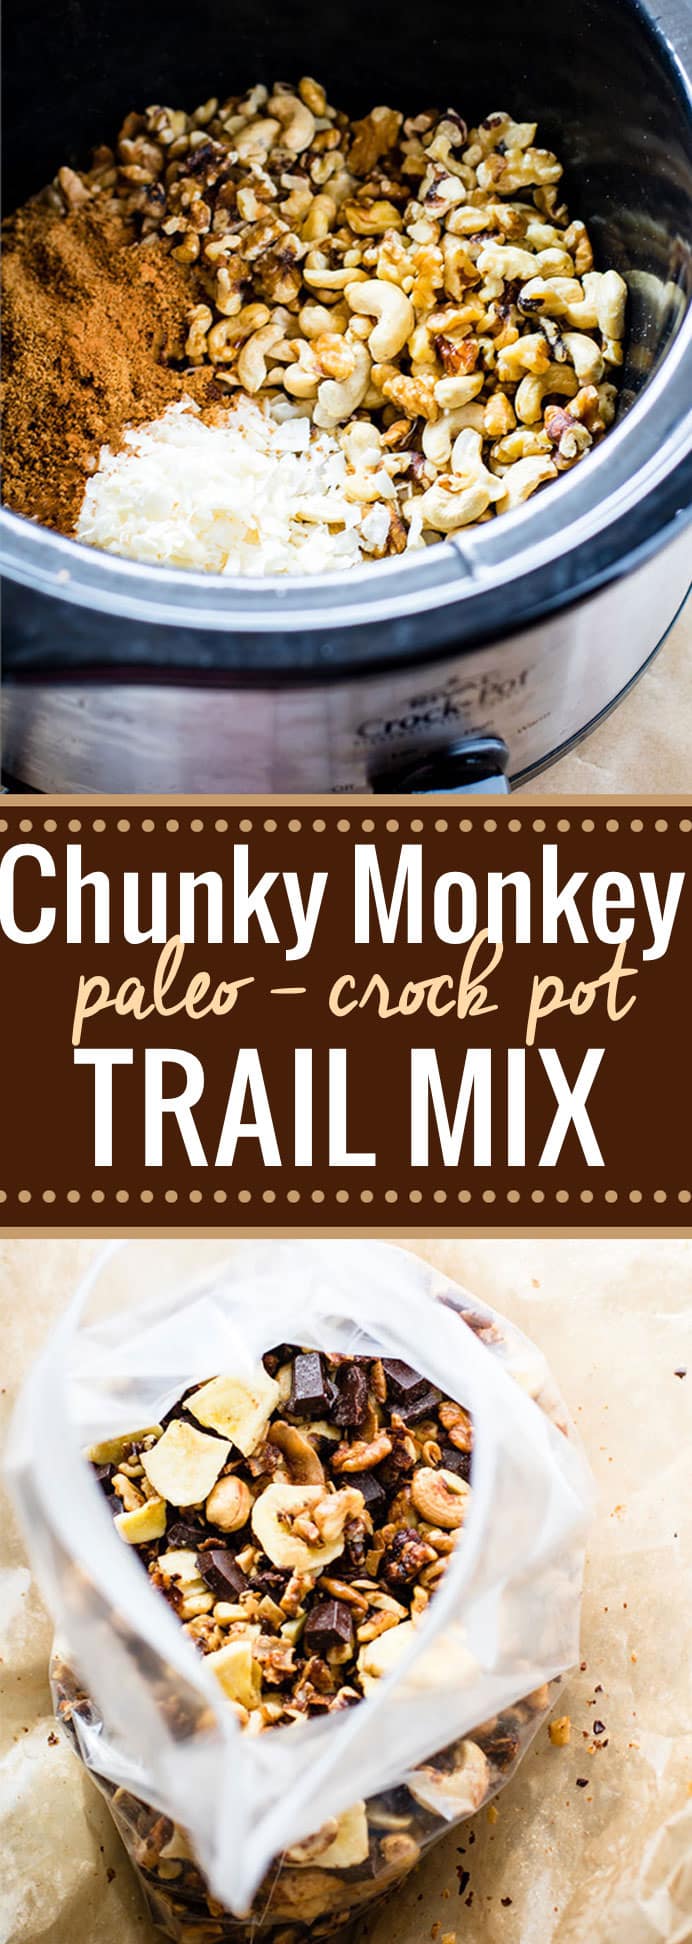 Crock Pot Chunky Monkey Paleo Trail Mix! A healthy grain free paleo trail mix that will give you energy, whether actually on a trail or snacking on the go! This chunky monkey paleo trail mix is one that you can make easy in the crockpot and lots of it. Get ready to munch on a handful mix of nuts, coconut, dark chocolate fudge chips, banana chips, and more! @cottercrunch